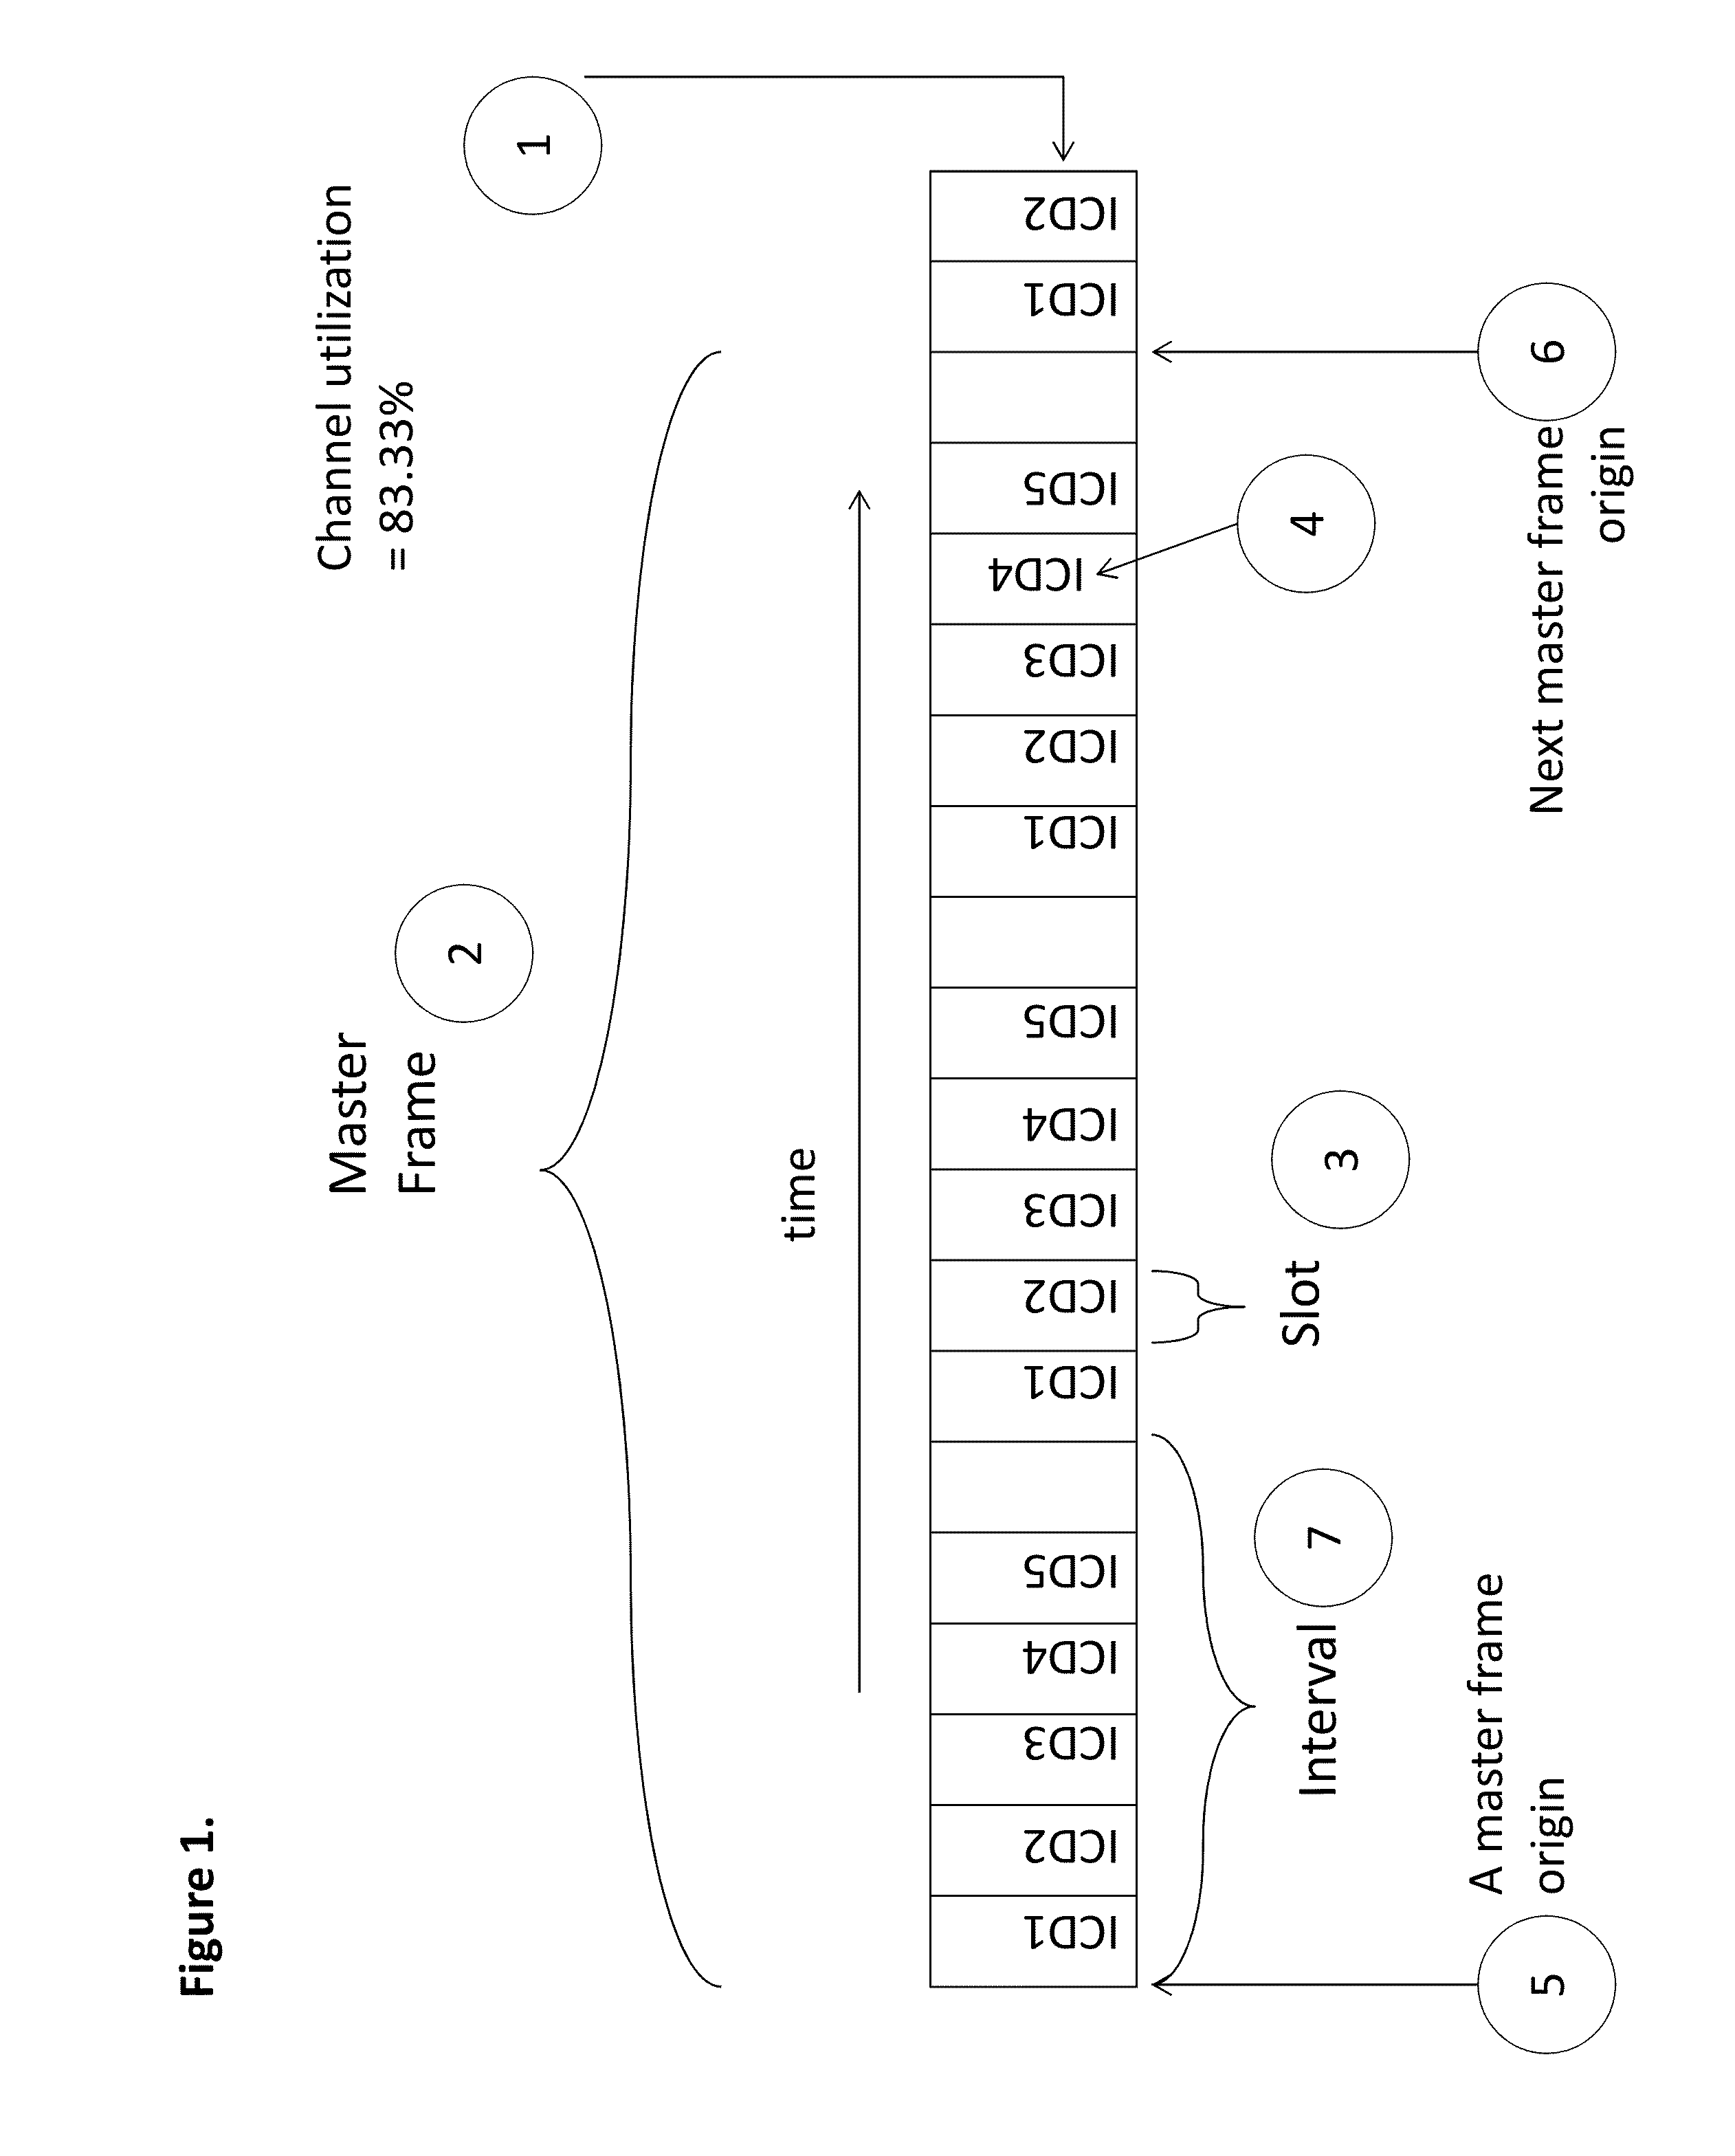 System and methods for synchronizing edge devices on channels without carrier sense